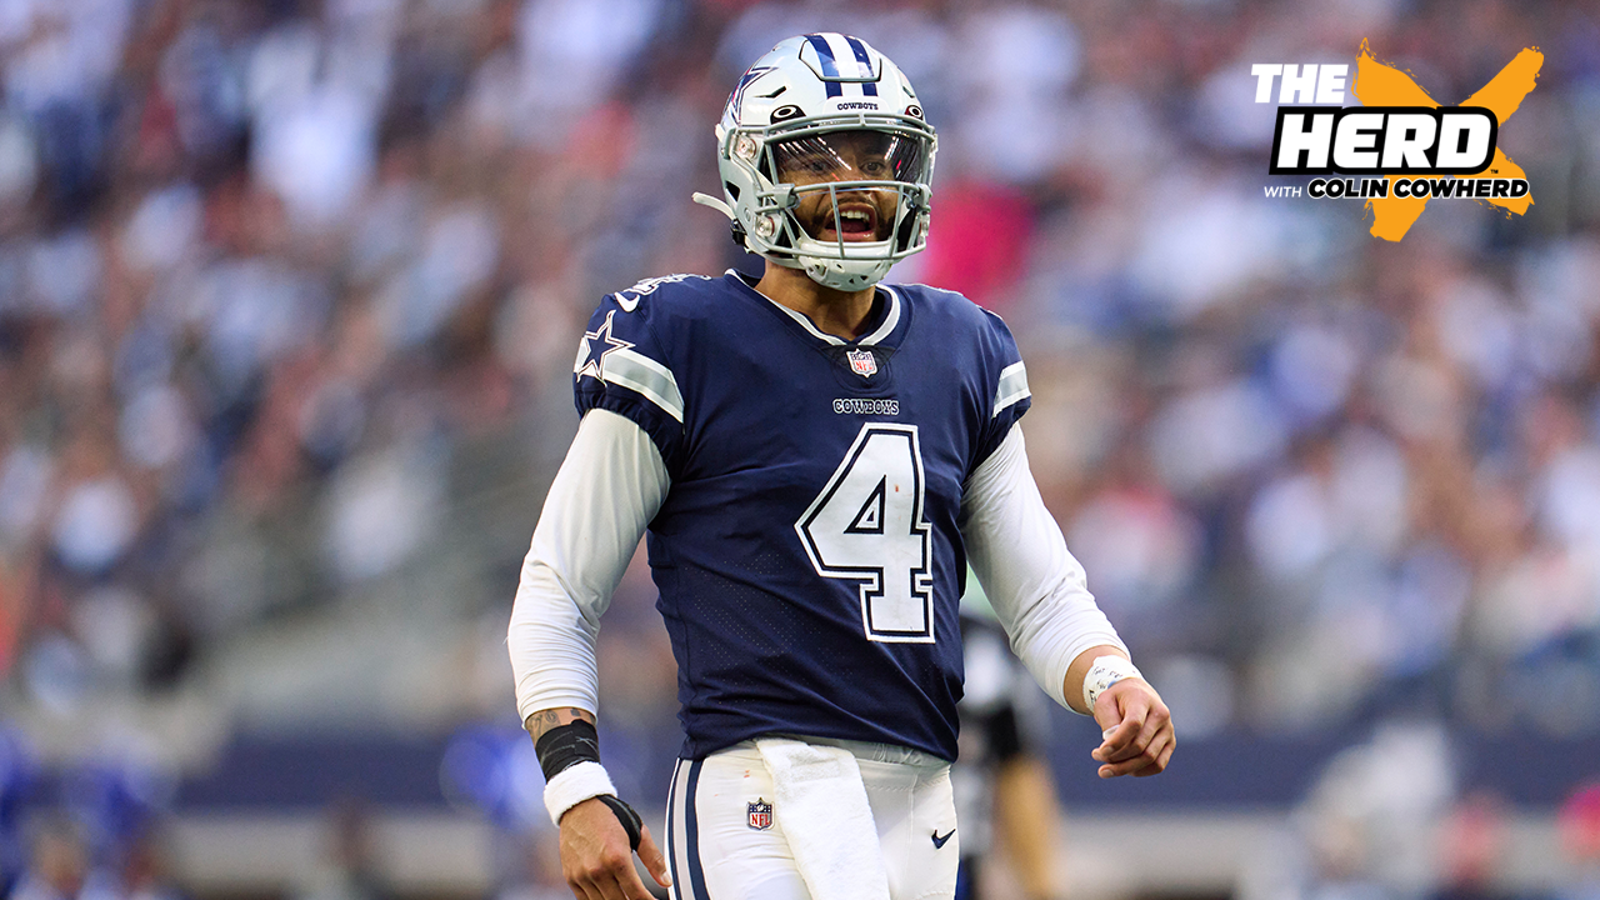 Are the Cowboys a threat in the NFC?